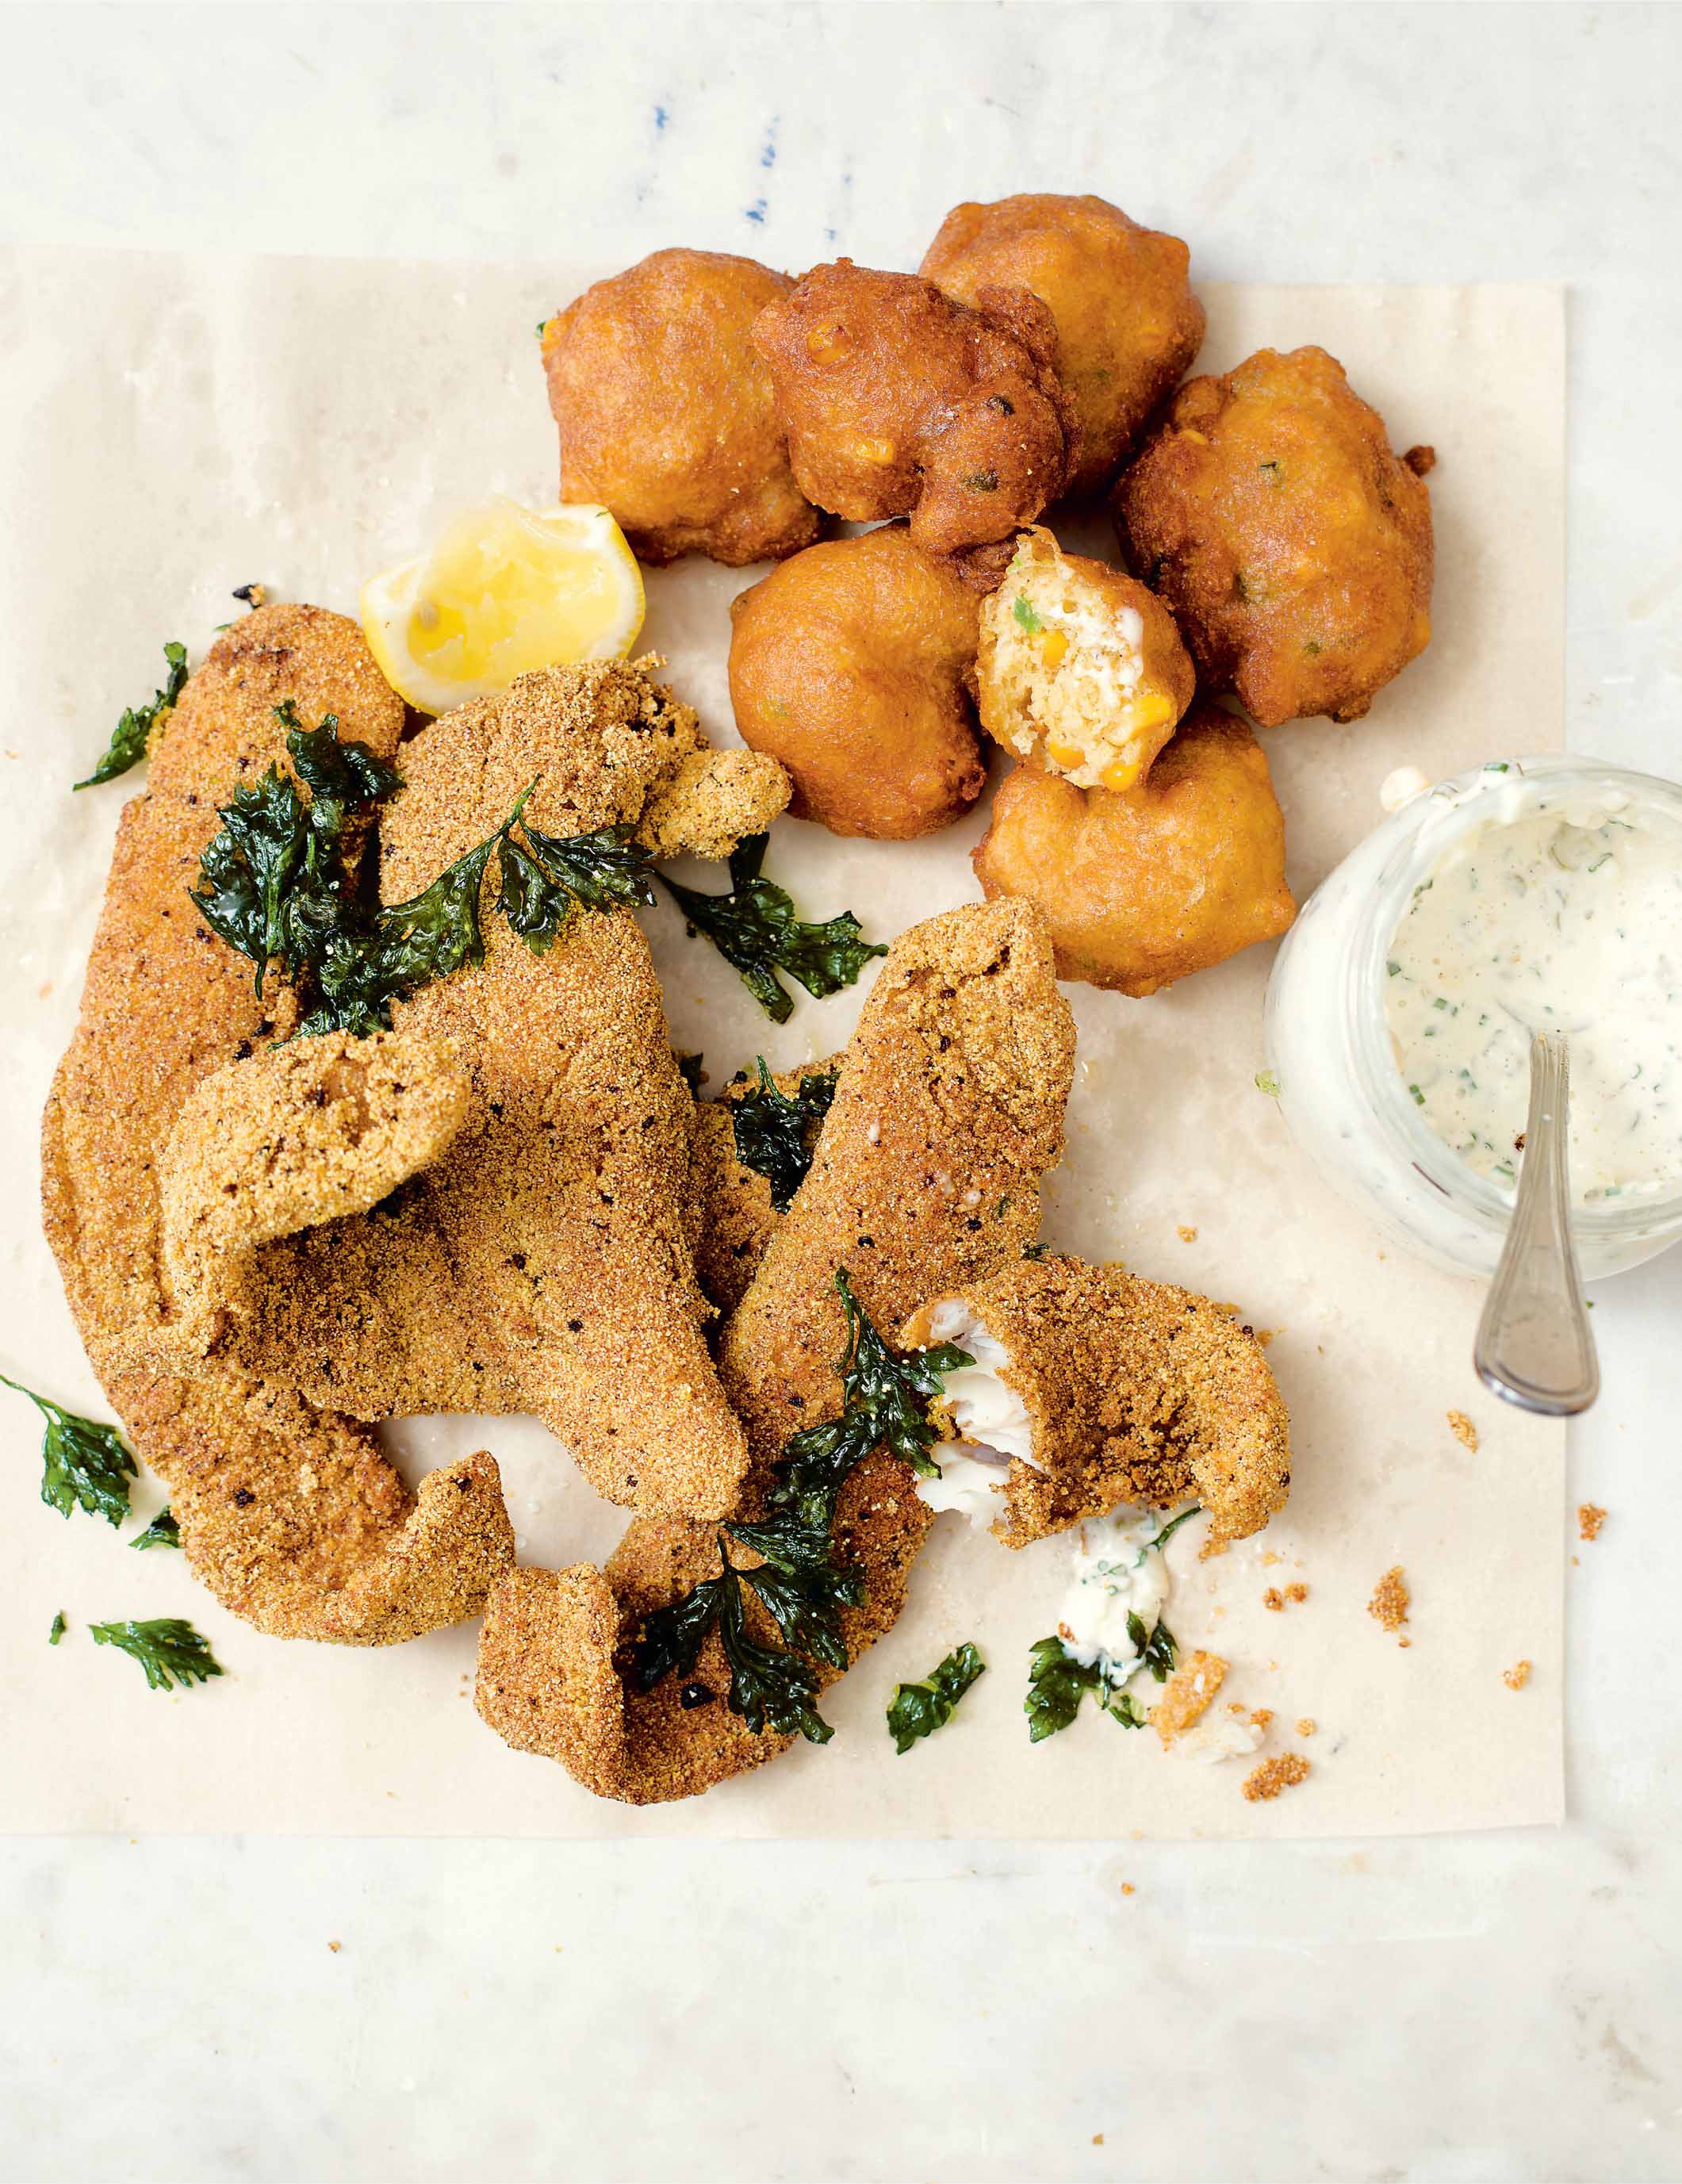 Fried catfish with hush puppies and tartare sauce